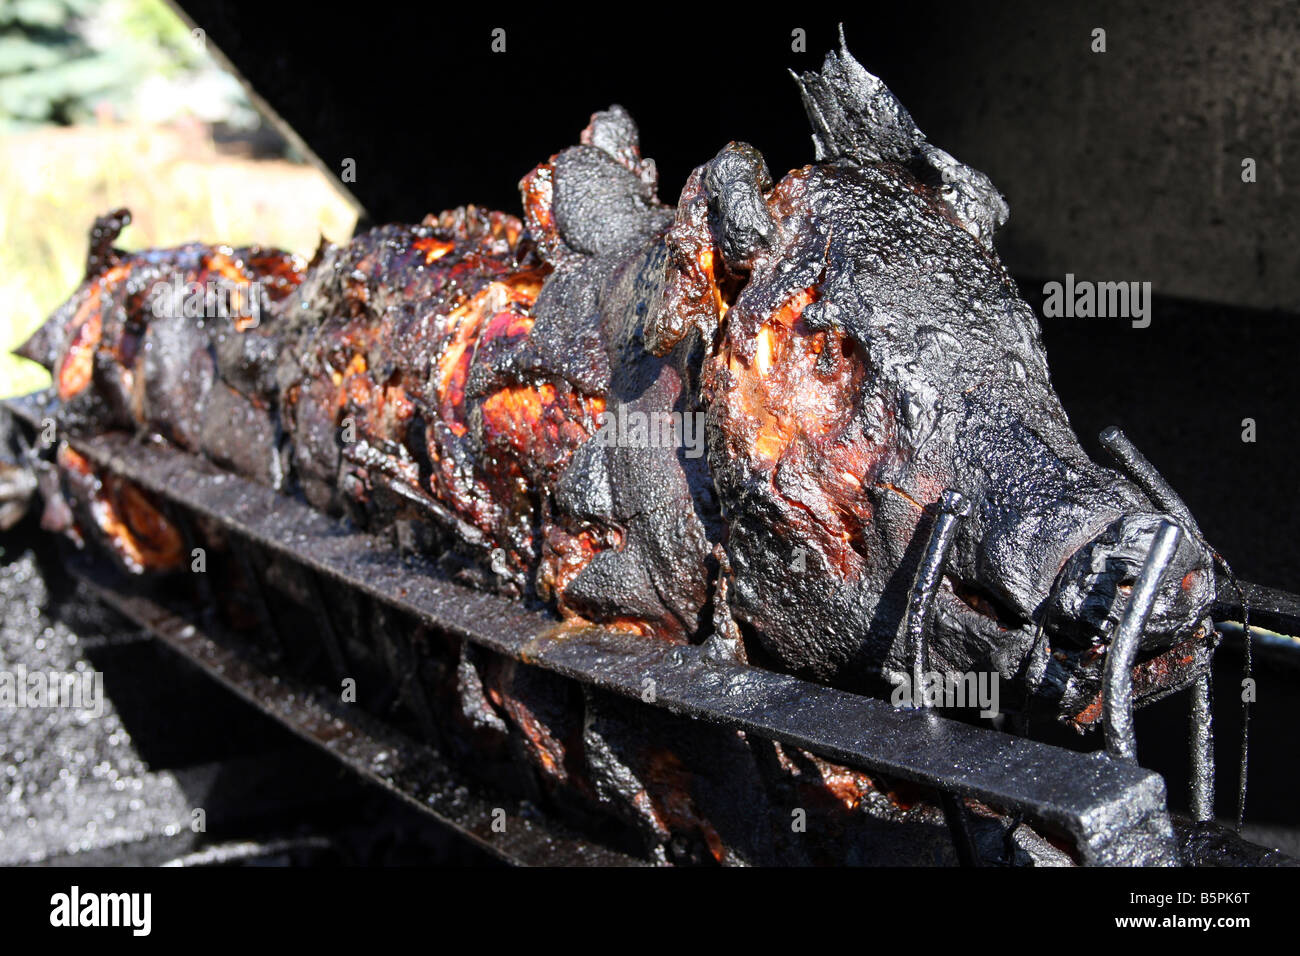 Dinner A completely cooked roasted pig on the spit still on the fire pit grill Stock Photo